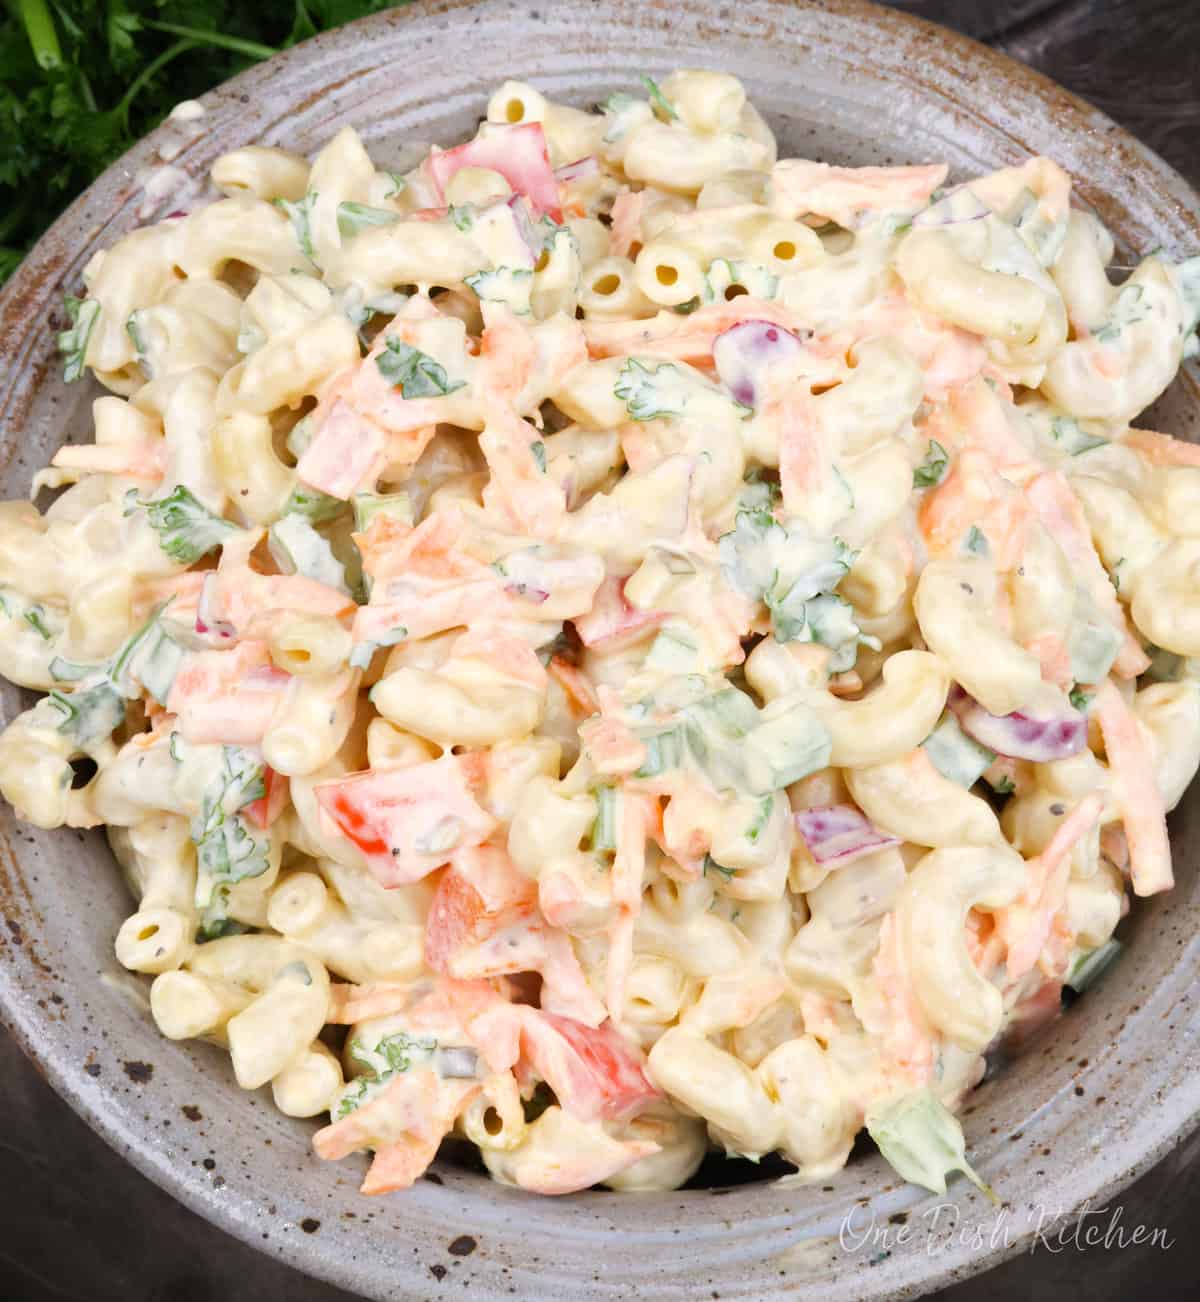 a single serving of macaroni salad in a blue bowl.